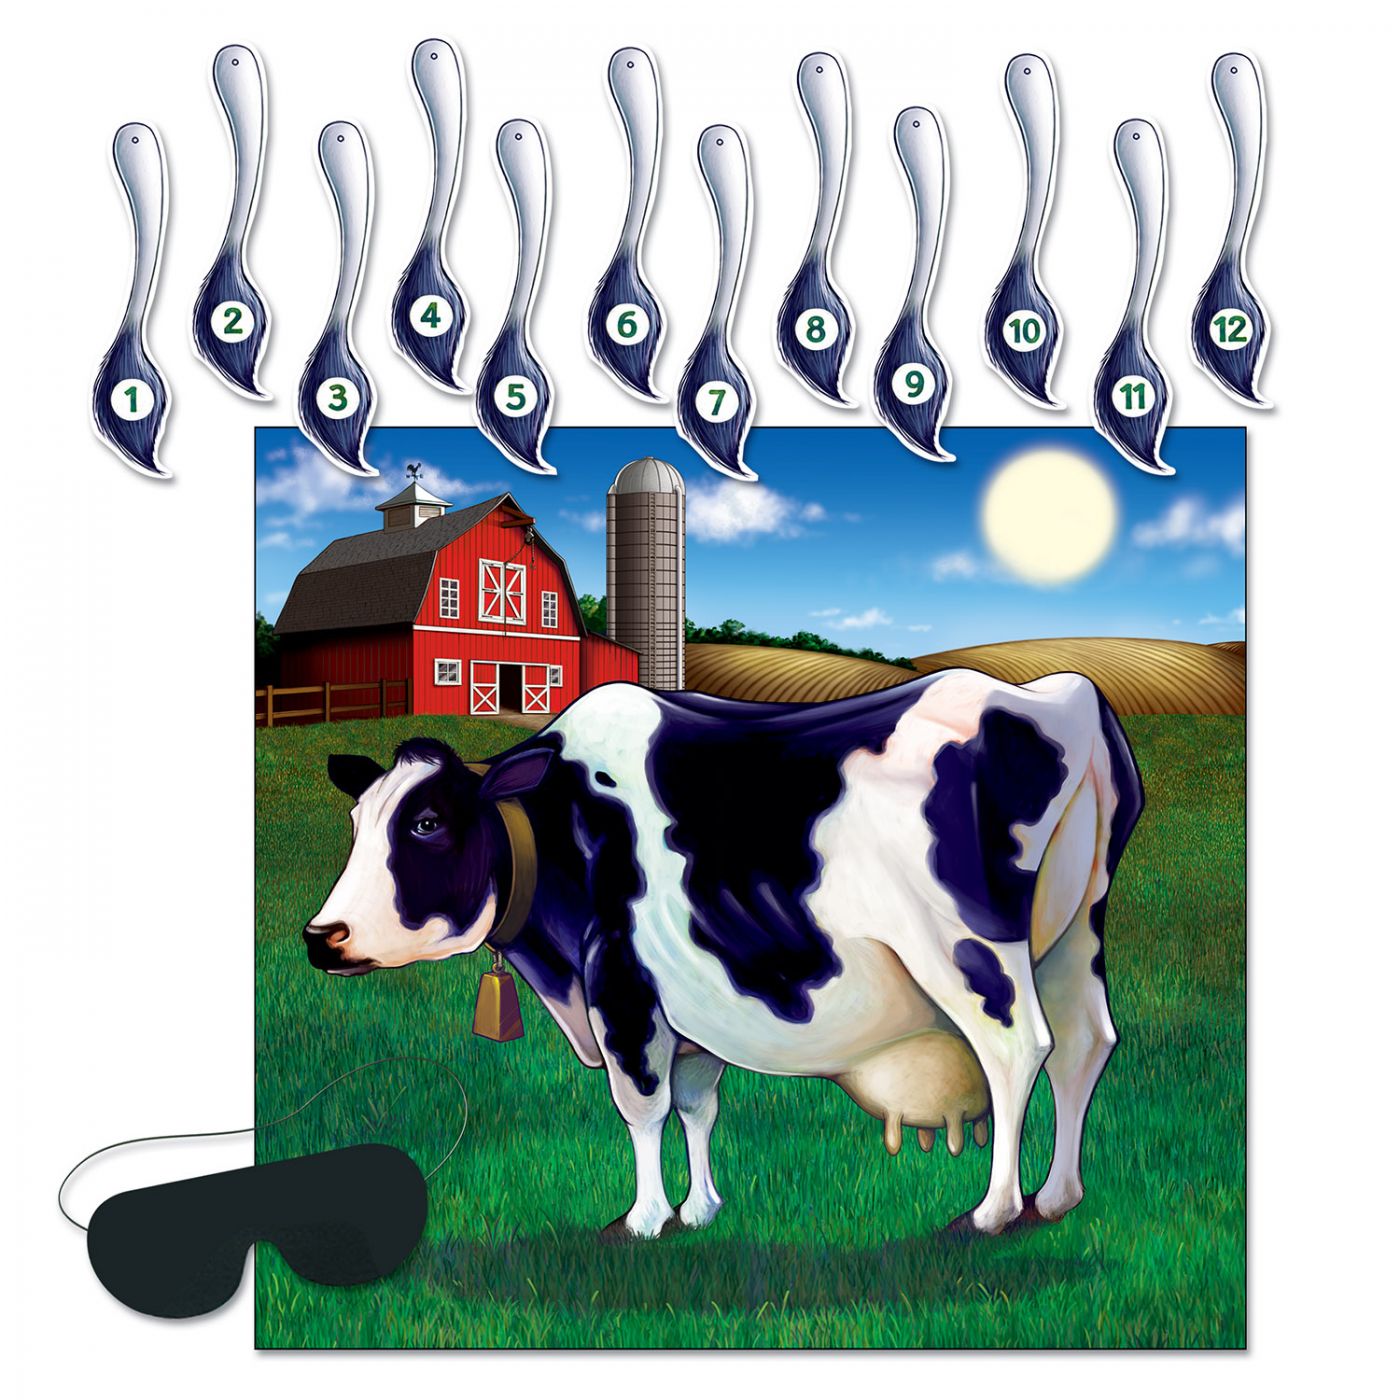 Pin The Tail On The Cow Game (24) image